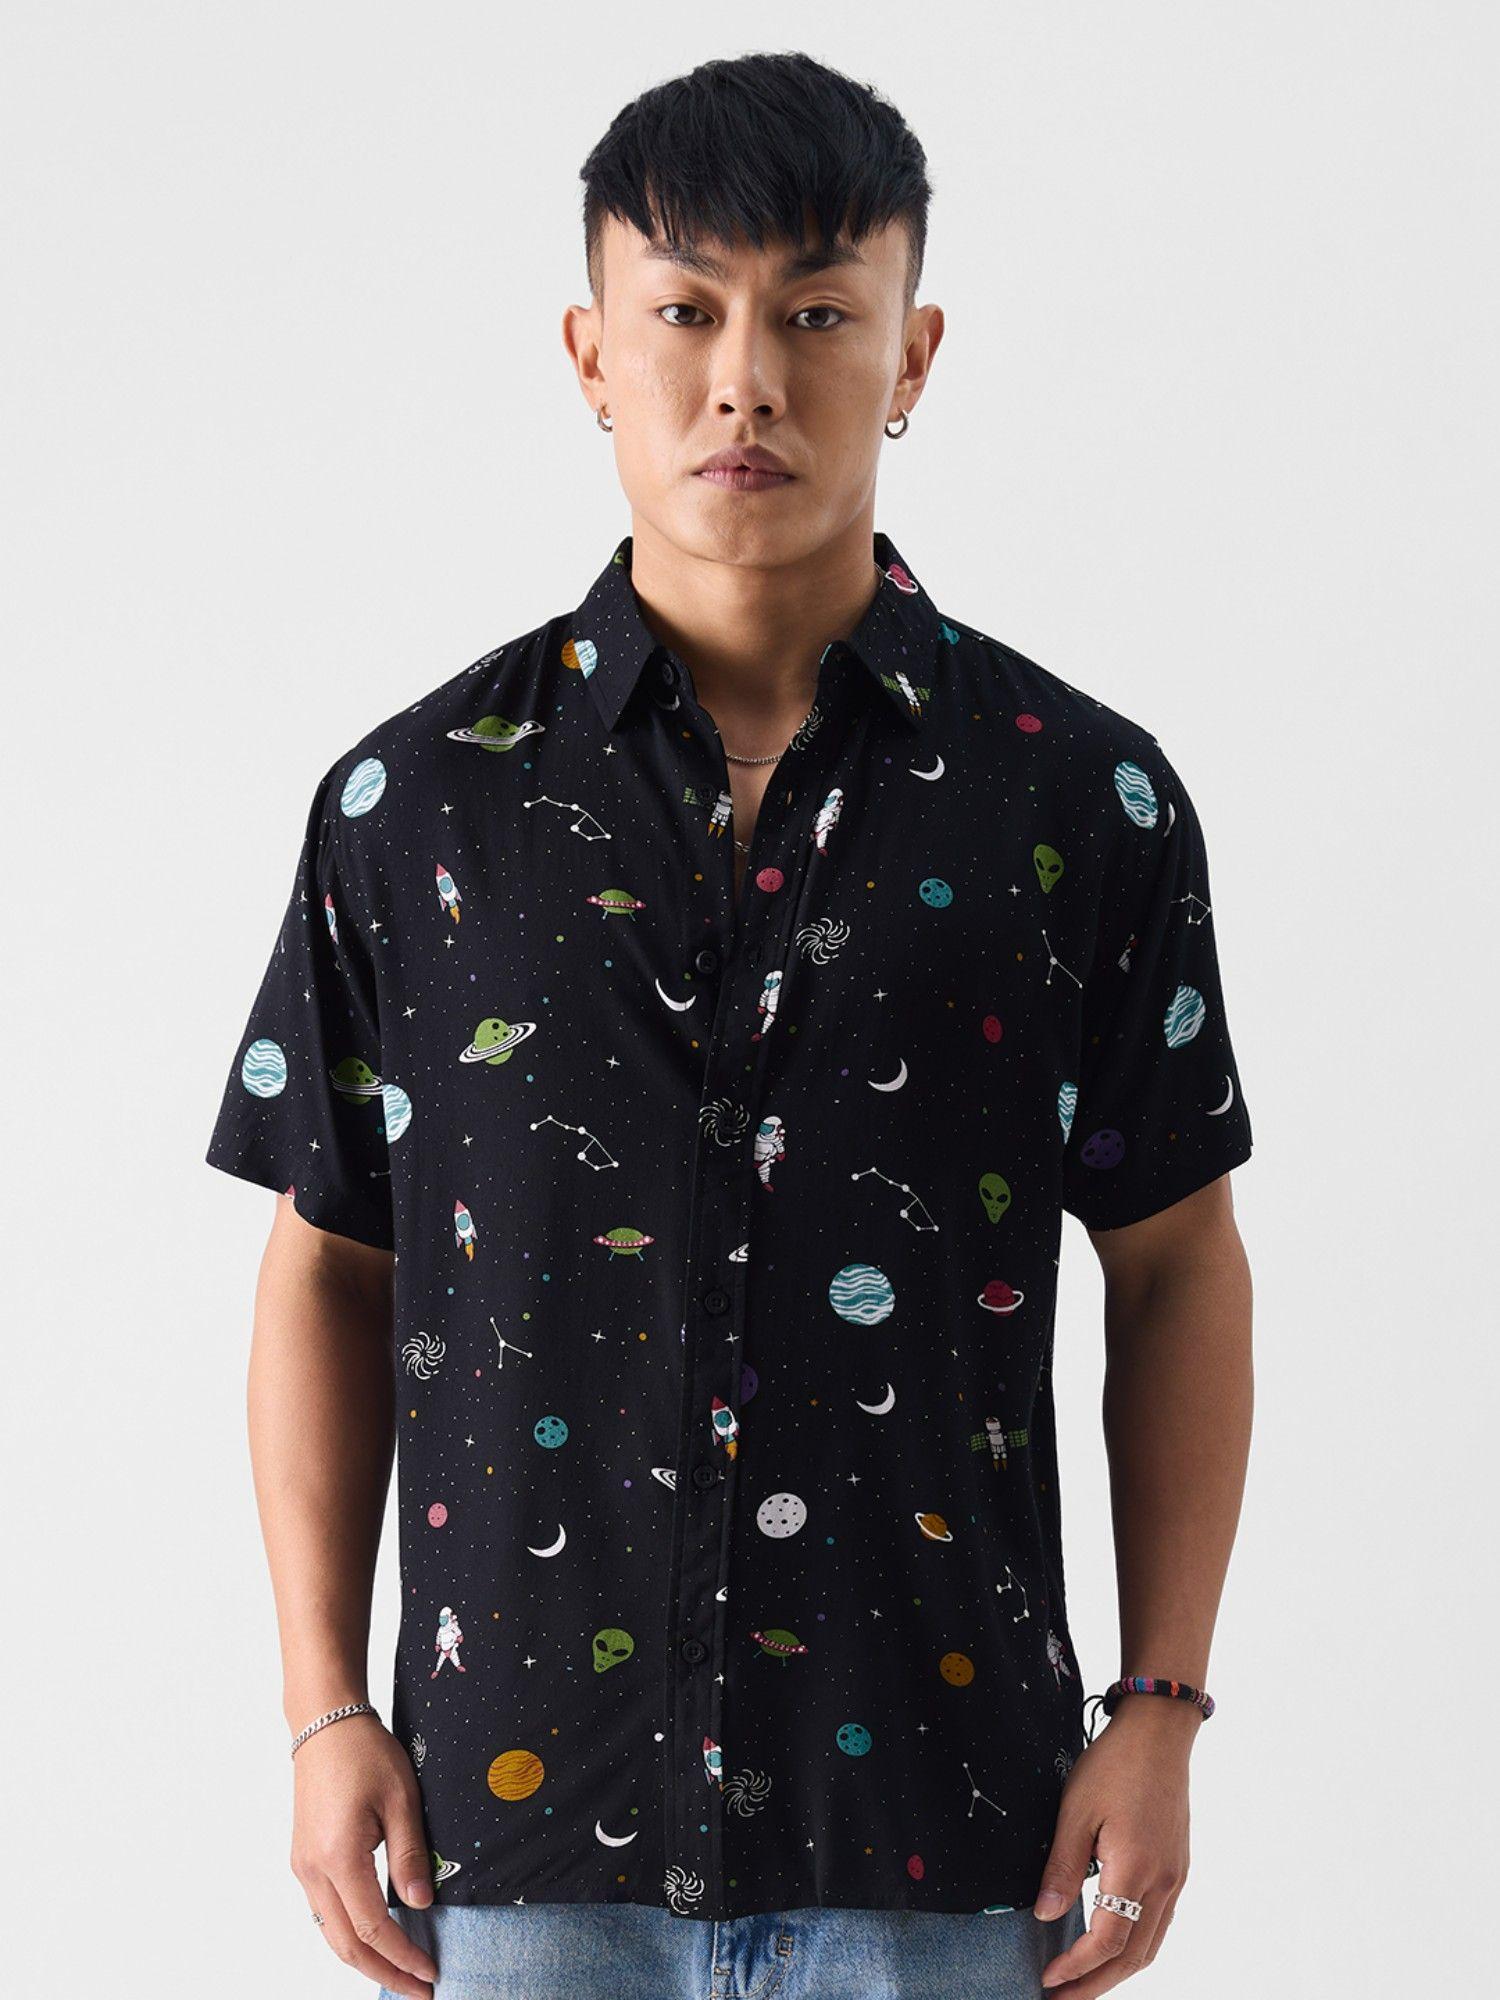 tss originals: outer space half sleeve shirts for mens